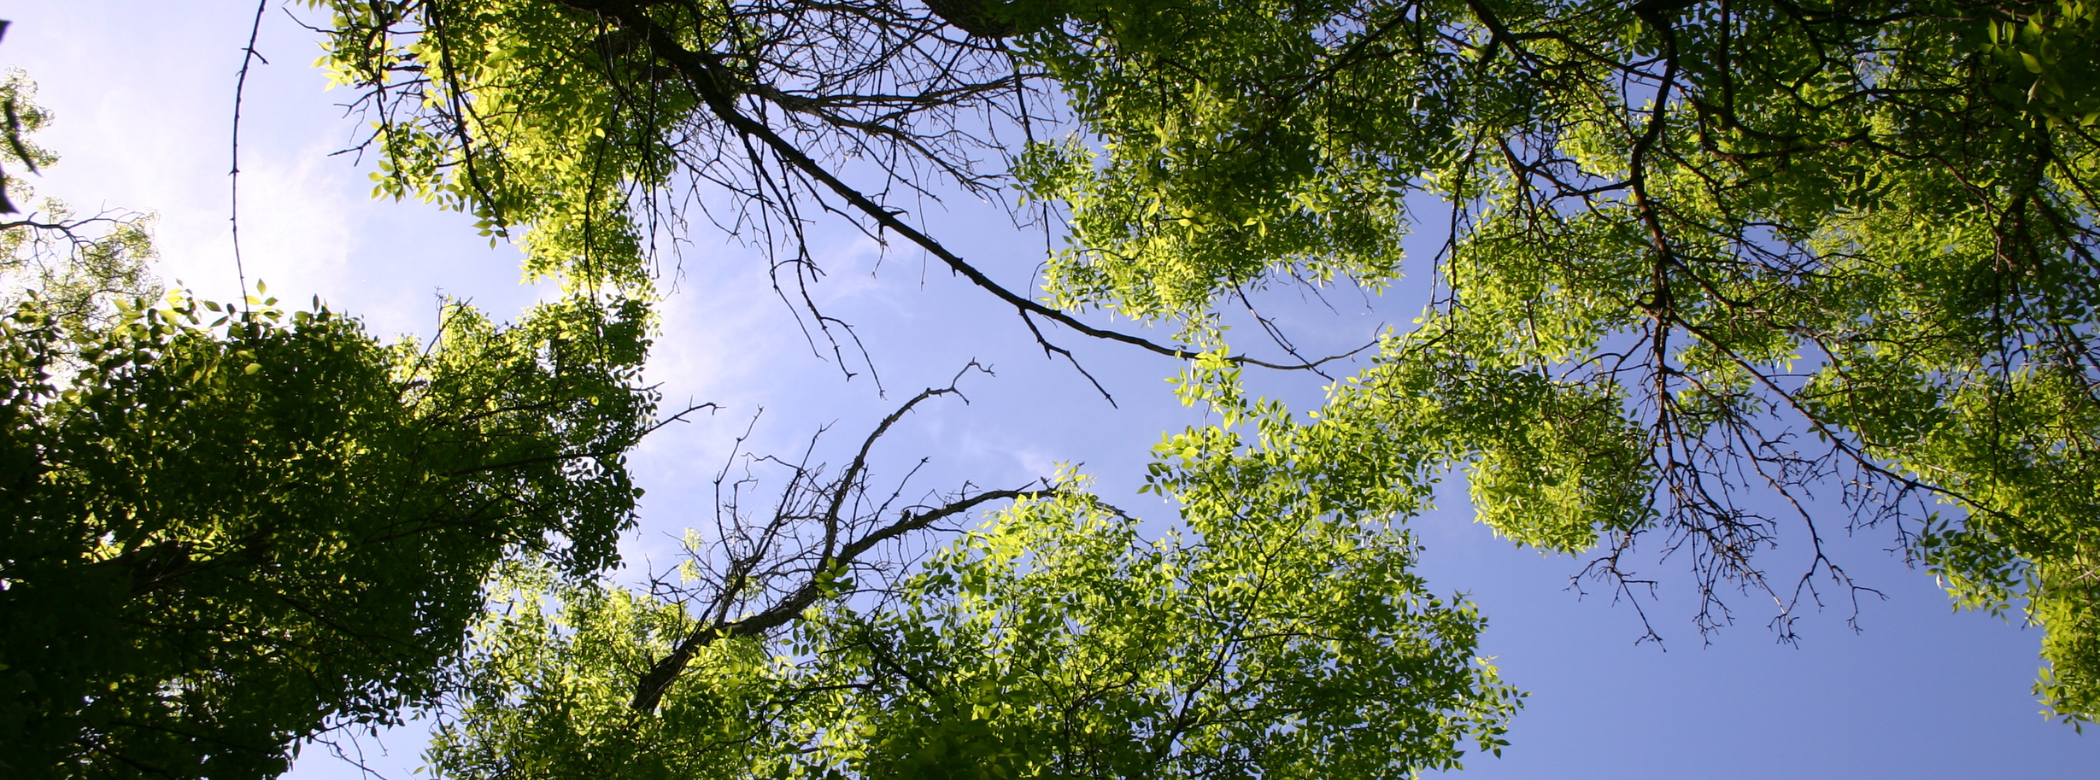 Looking up at a blue sky through a canopy of green-leaved trees.